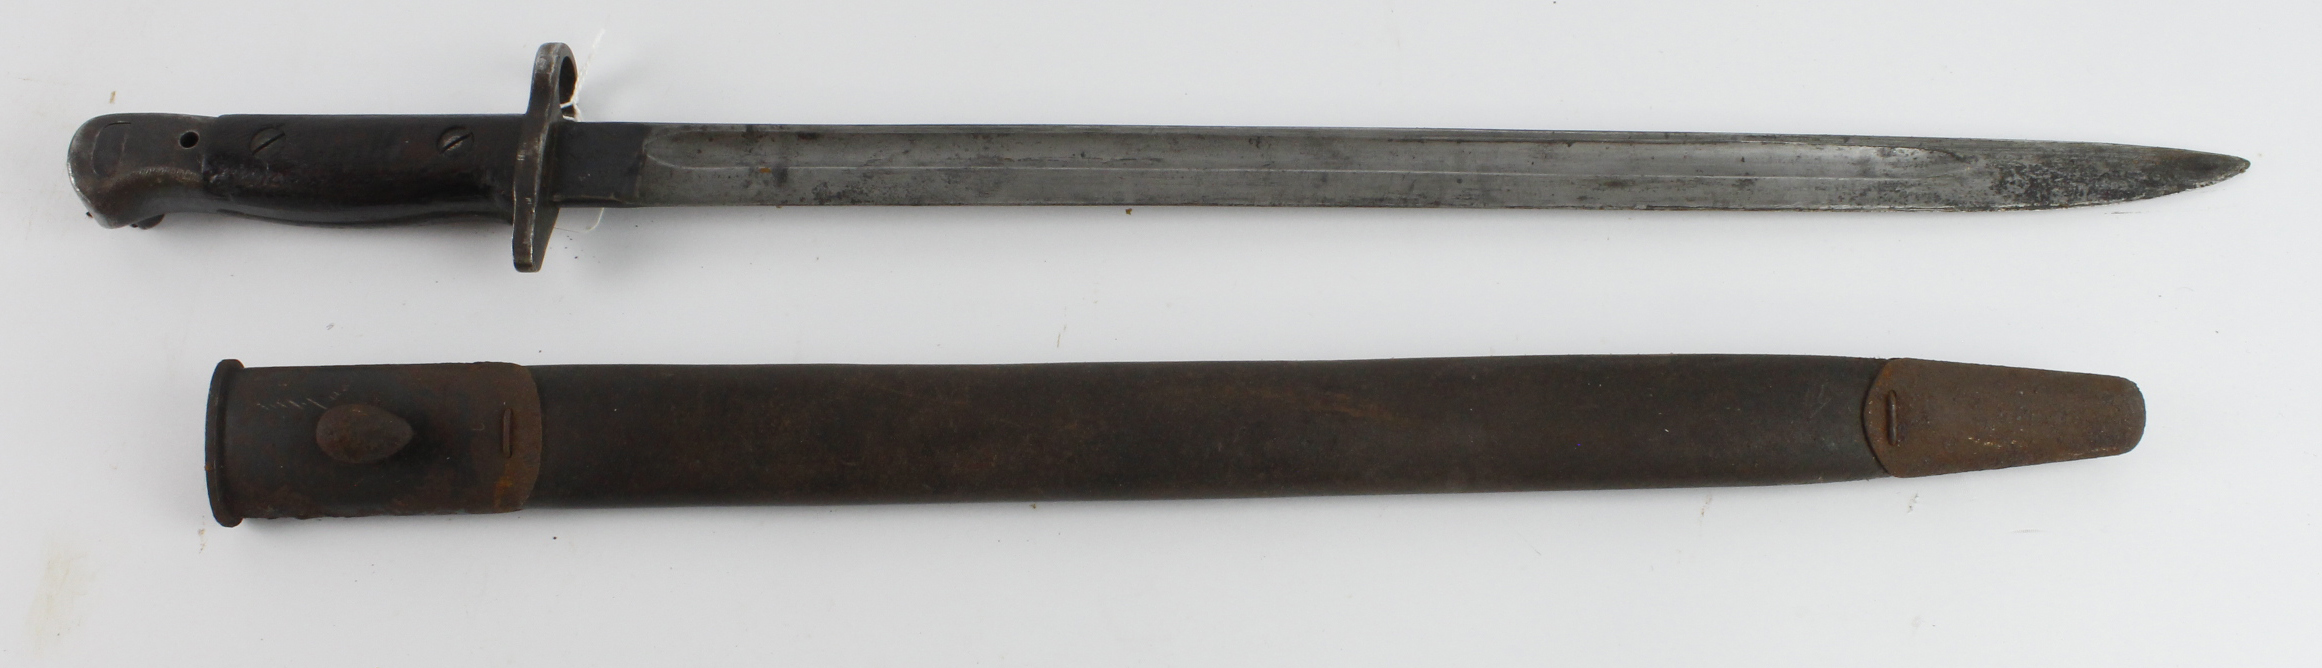 Bayonet 1907 pattern made by Mole with scarce ERVII cypher in its tear drop scabbard.